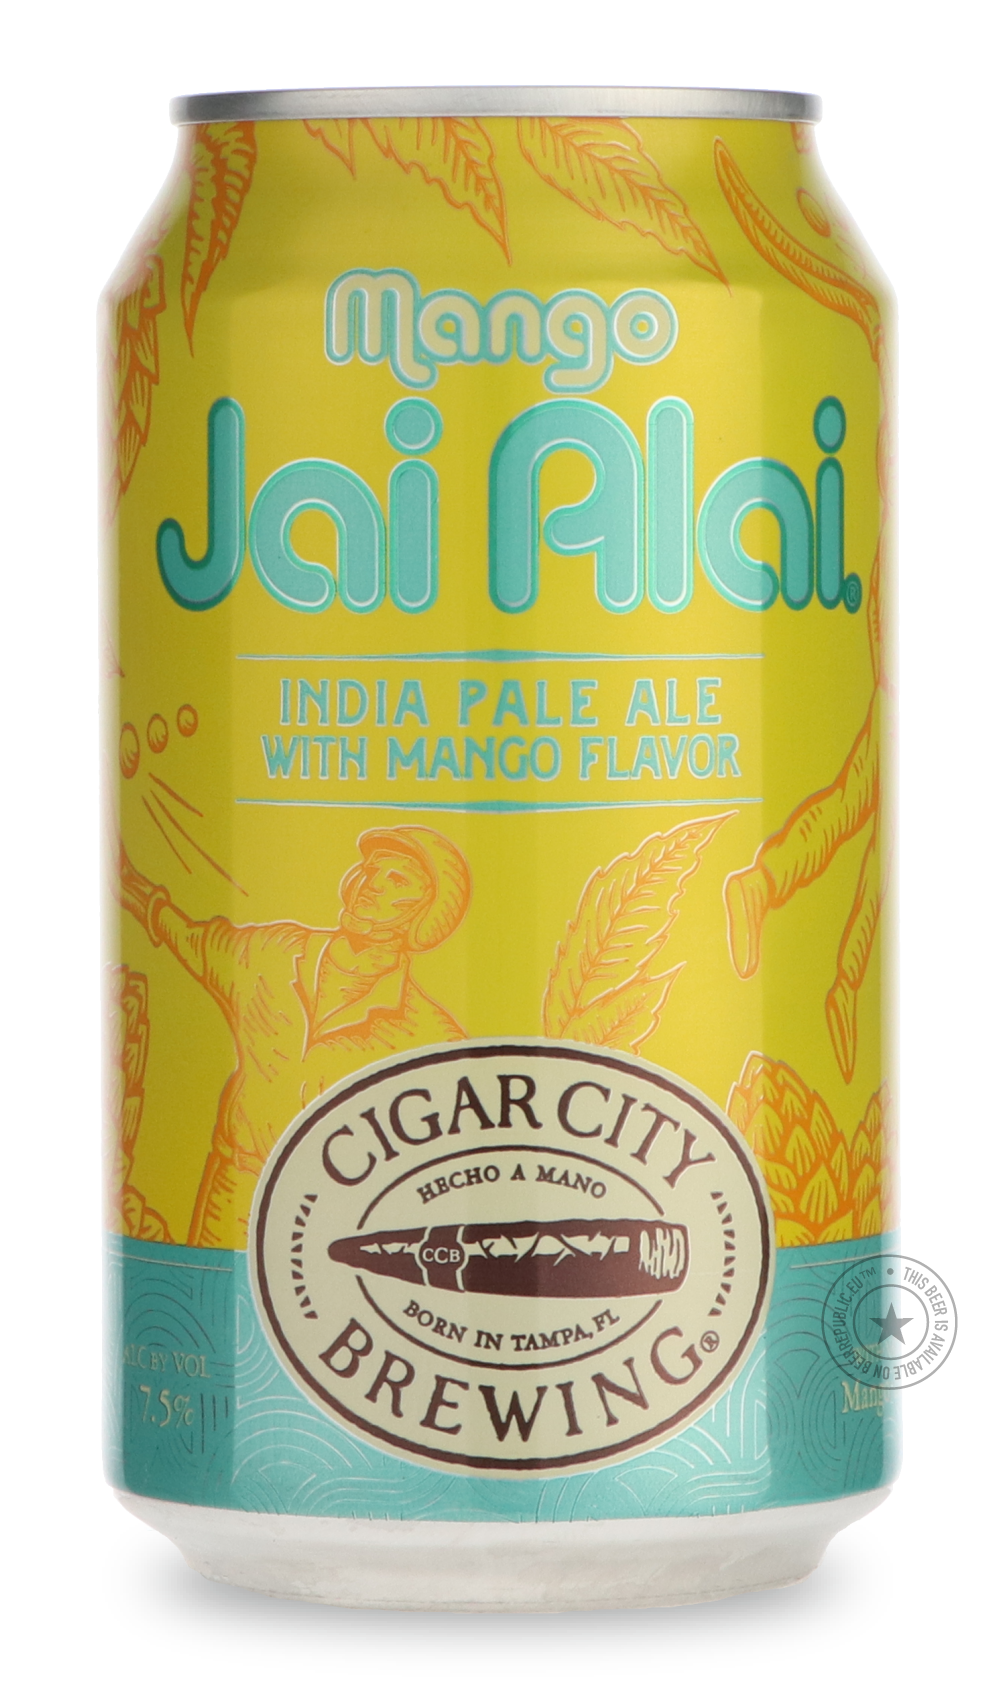 -Cigar City- Mango Jai Alai-IPA- Only @ Beer Republic - The best online beer store for American & Canadian craft beer - Buy beer online from the USA and Canada - Bier online kopen - Amerikaans bier kopen - Craft beer store - Craft beer kopen - Amerikanisch bier kaufen - Bier online kaufen - Acheter biere online - IPA - Stout - Porter - New England IPA - Hazy IPA - Imperial Stout - Barrel Aged - Barrel Aged Imperial Stout - Brown - Dark beer - Blond - Blonde - Pilsner - Lager - Wheat - Weizen - Amber - Barle